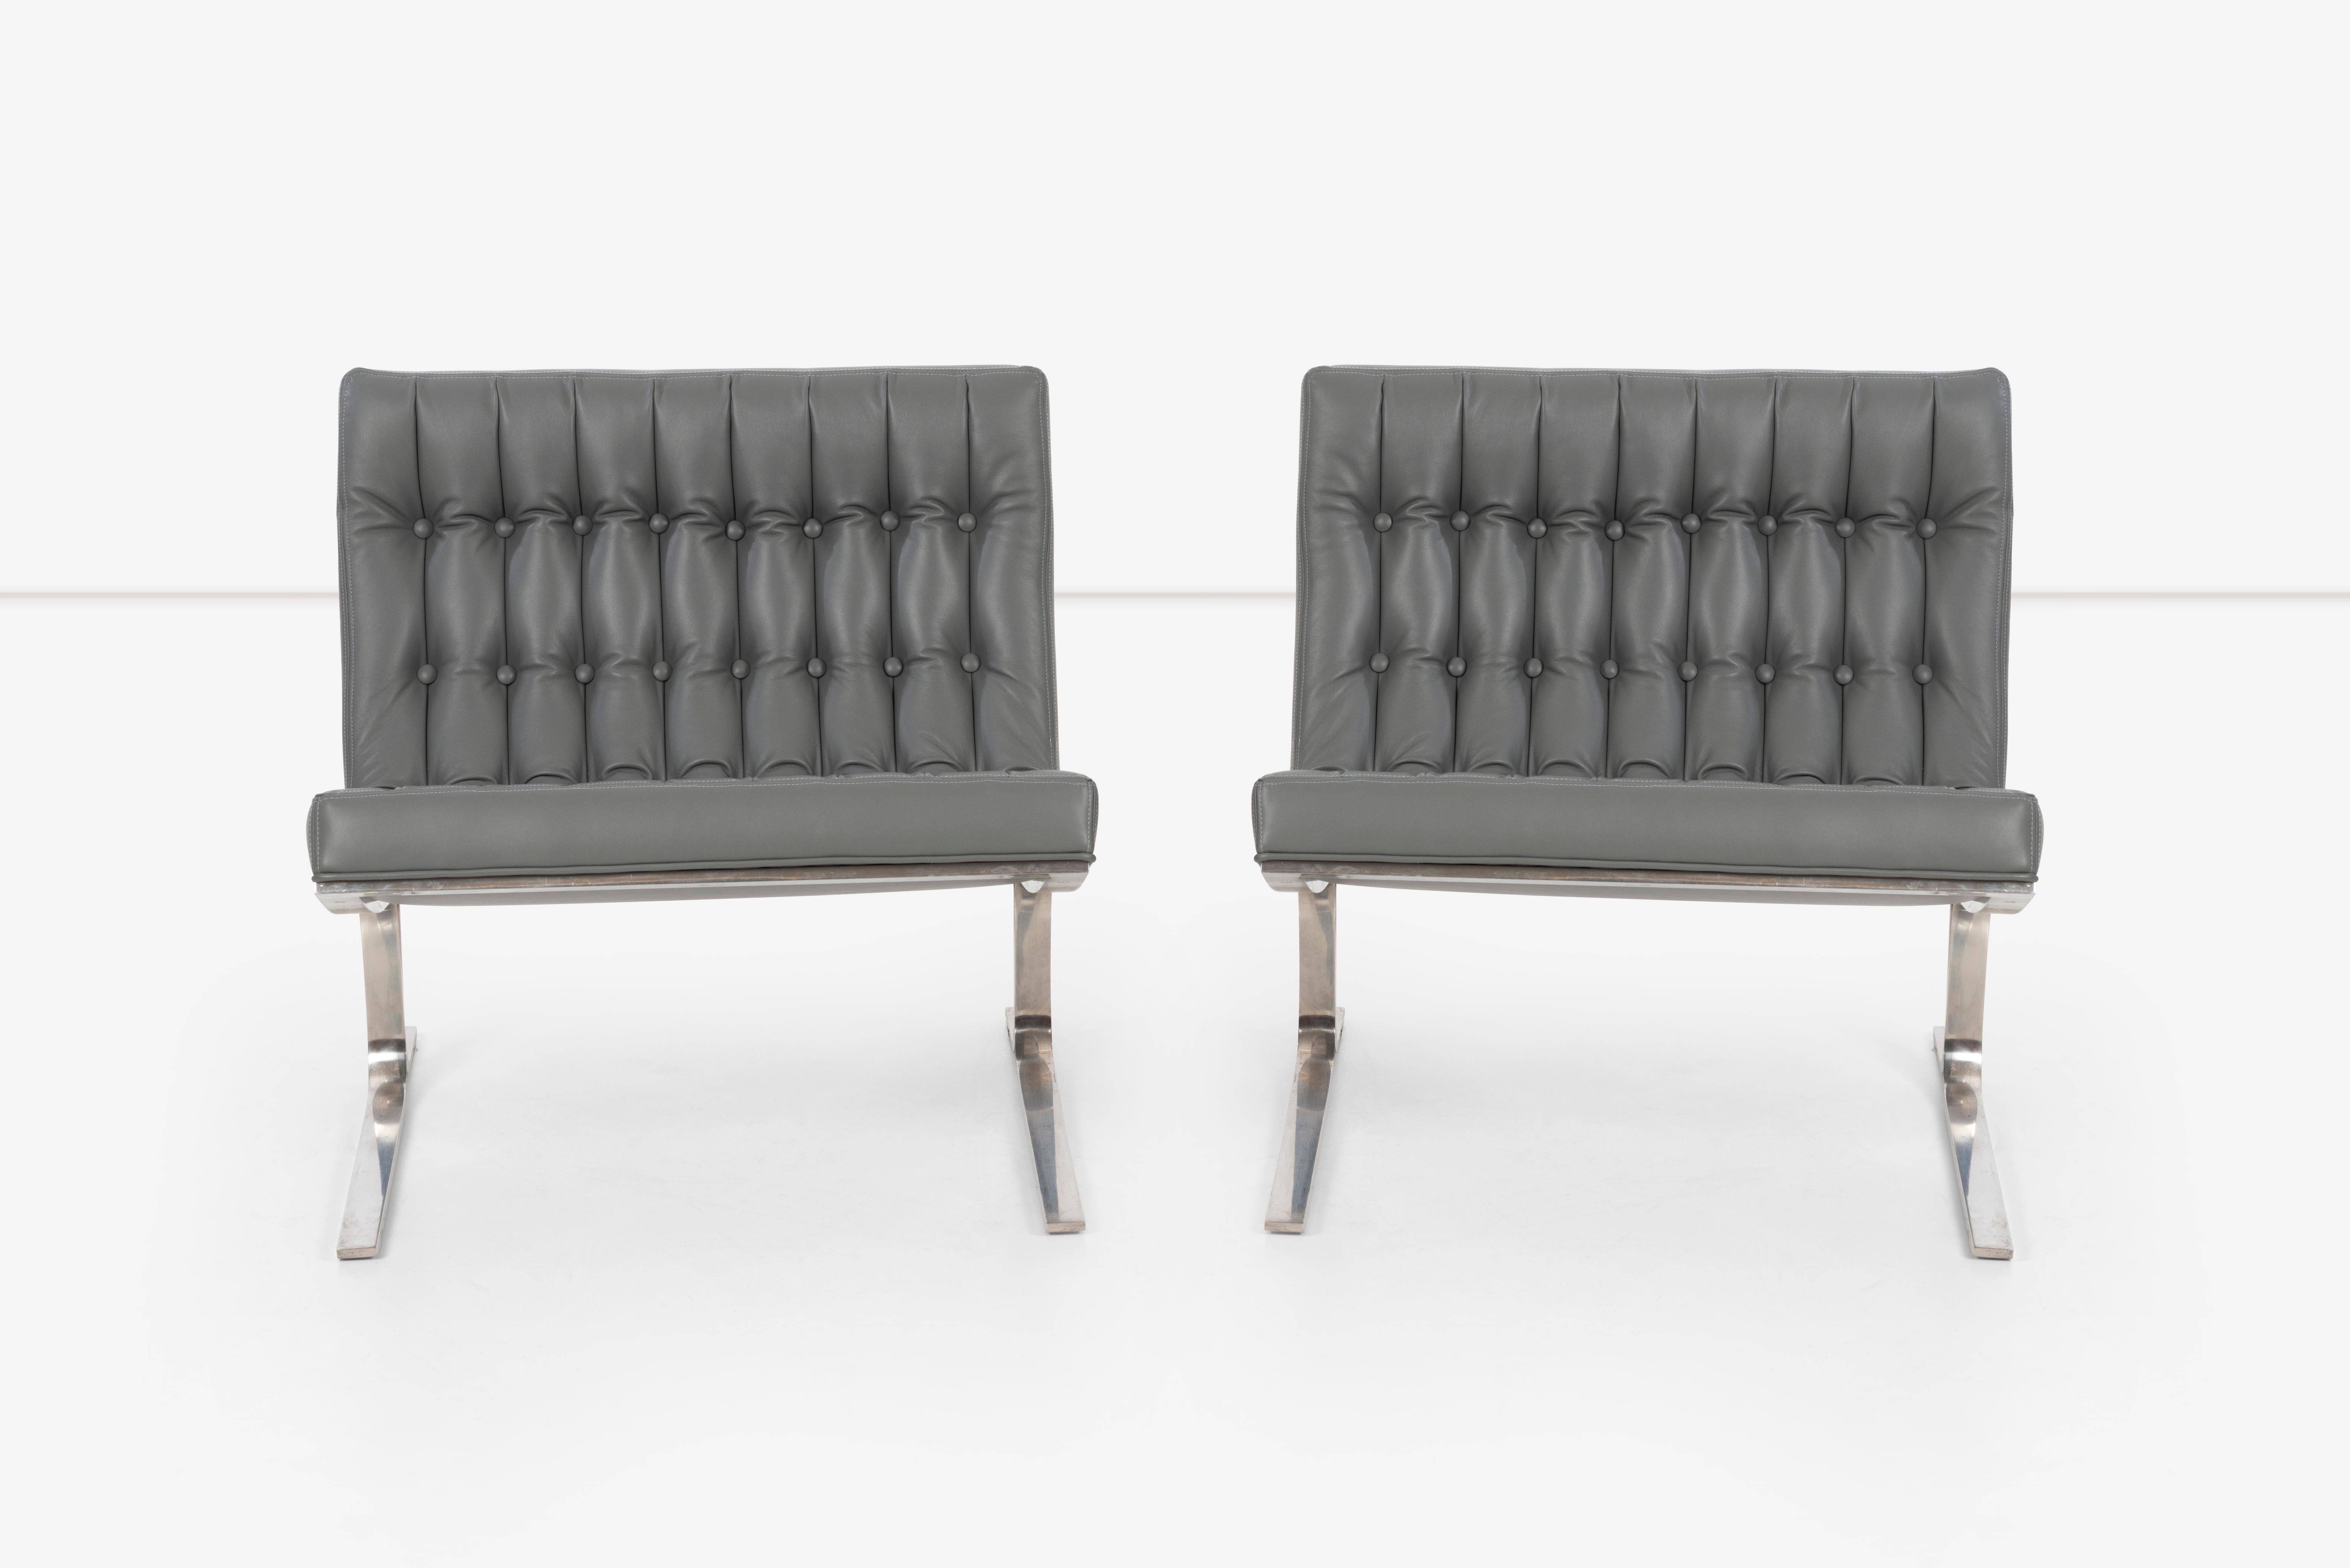 Nicos Zographos 1959 CH28 Lounge chairs; Solid cantilevered stainless steel frame, reupholstered, tufted and channeled with Spinneybeck leather.
Measure: Seat height 17